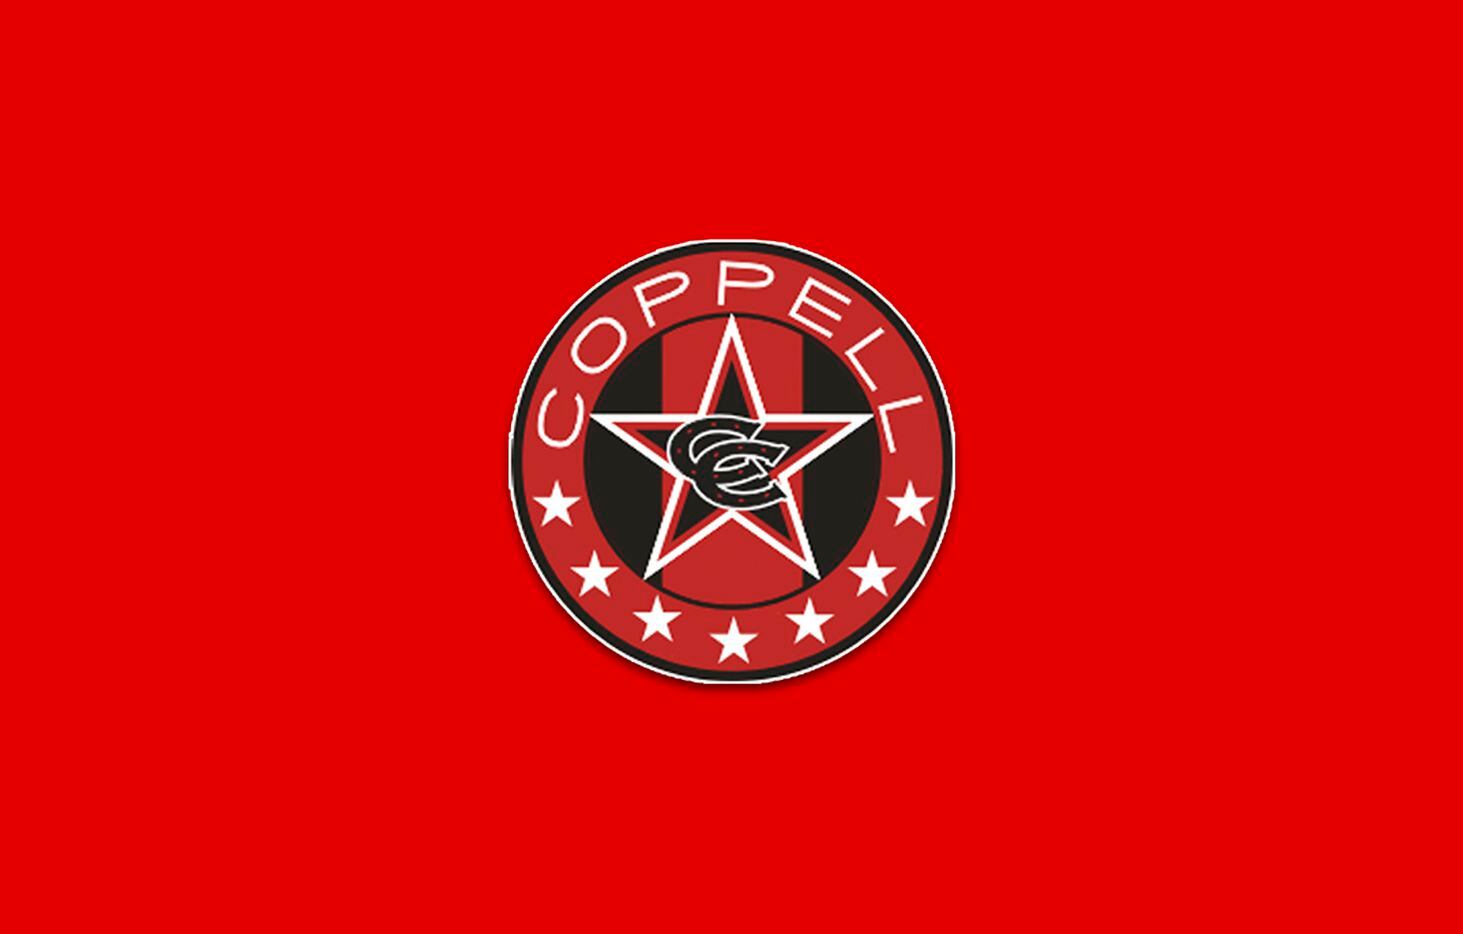 Coppell logo.